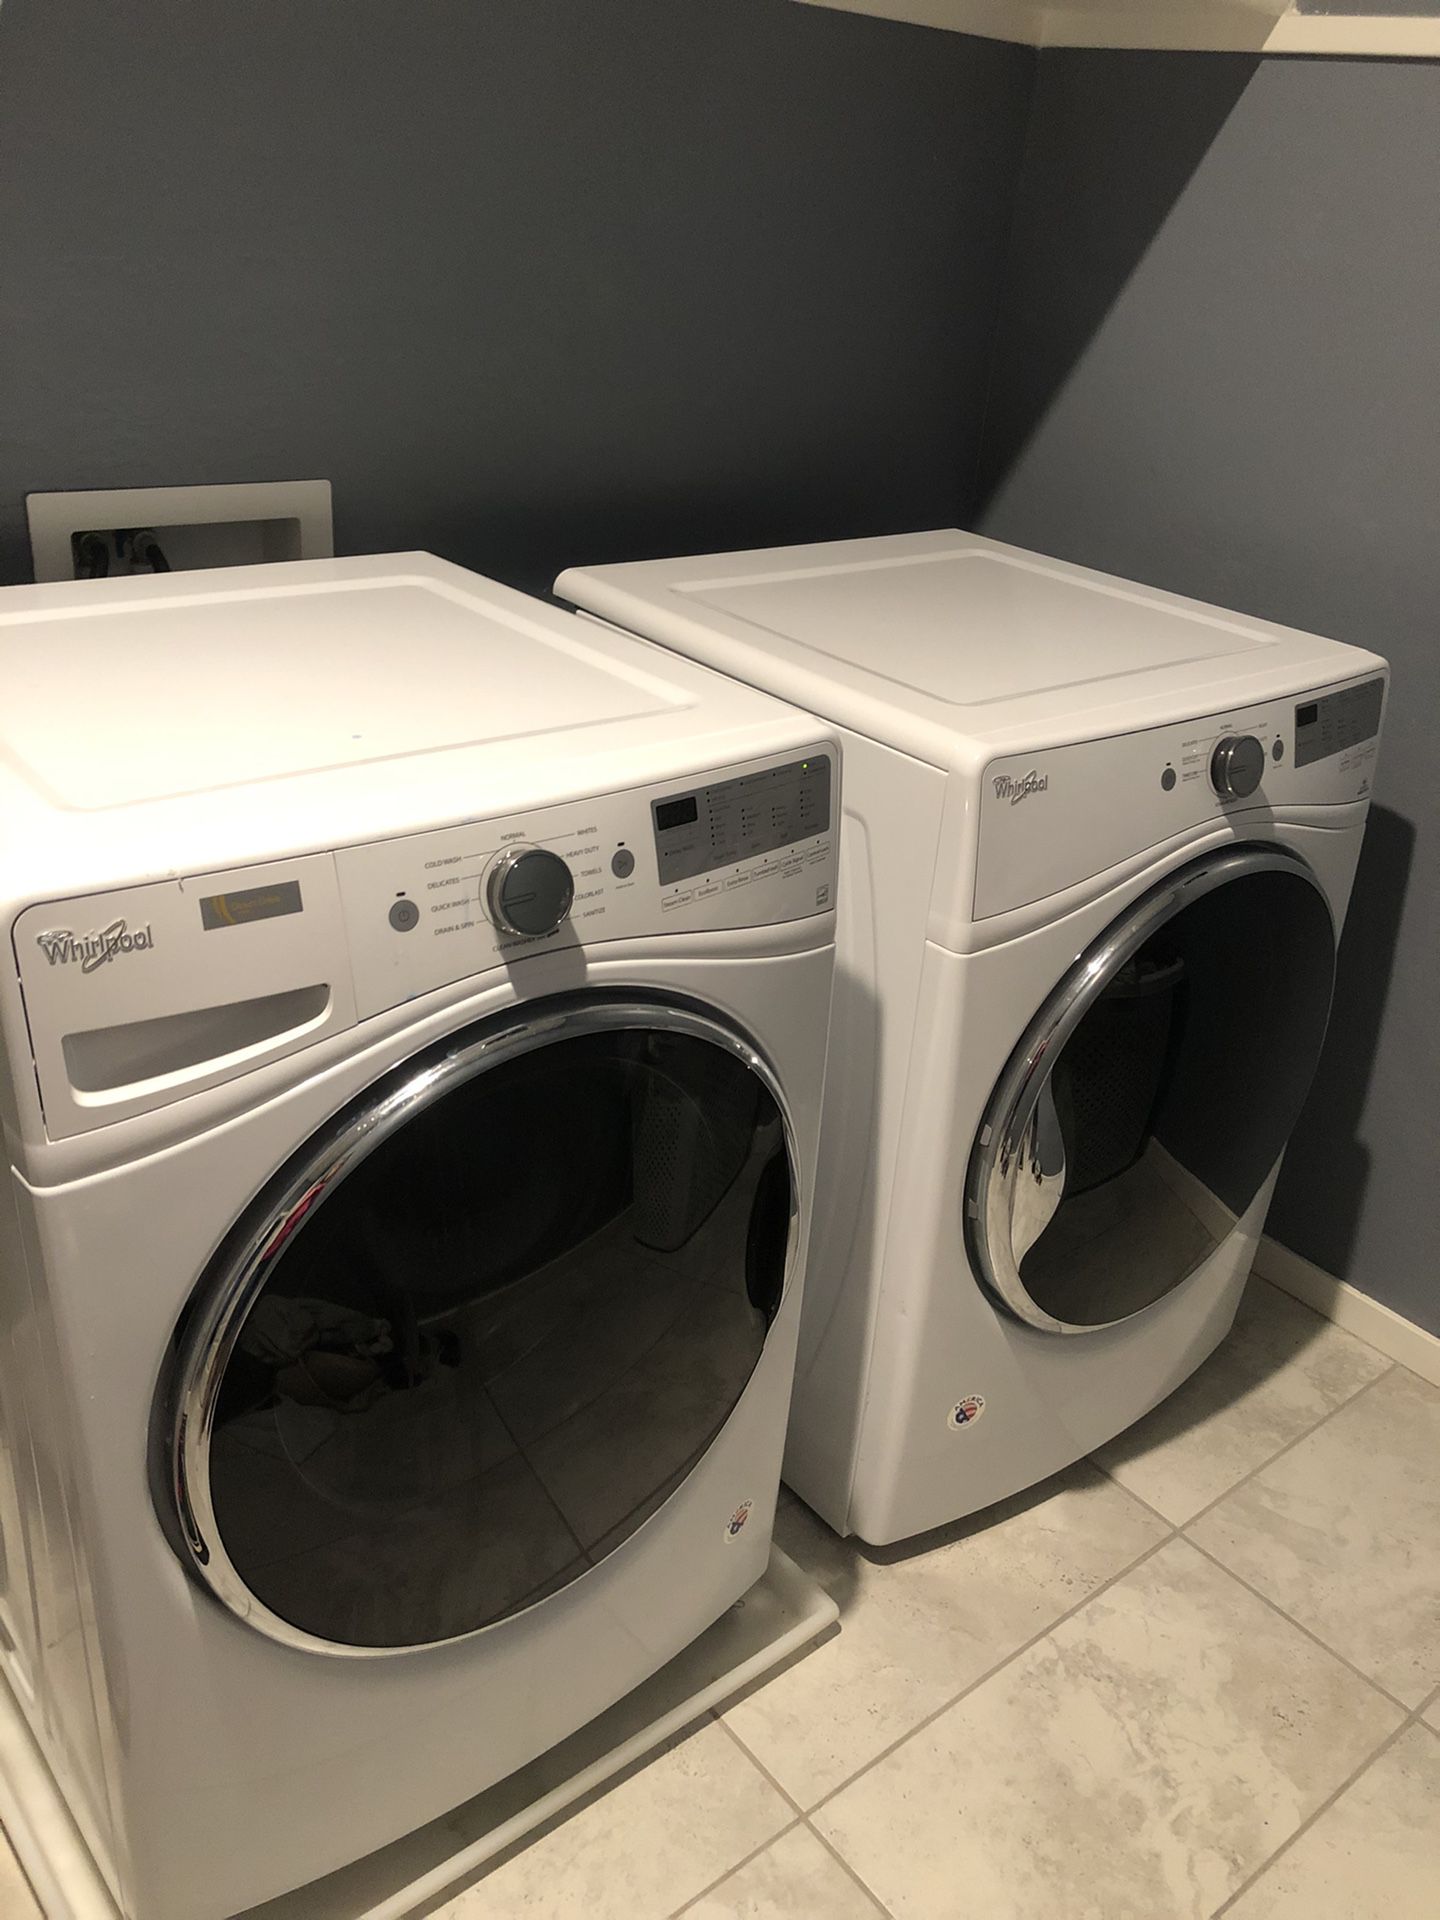 Whirlpool Washer and Electric Dryer.